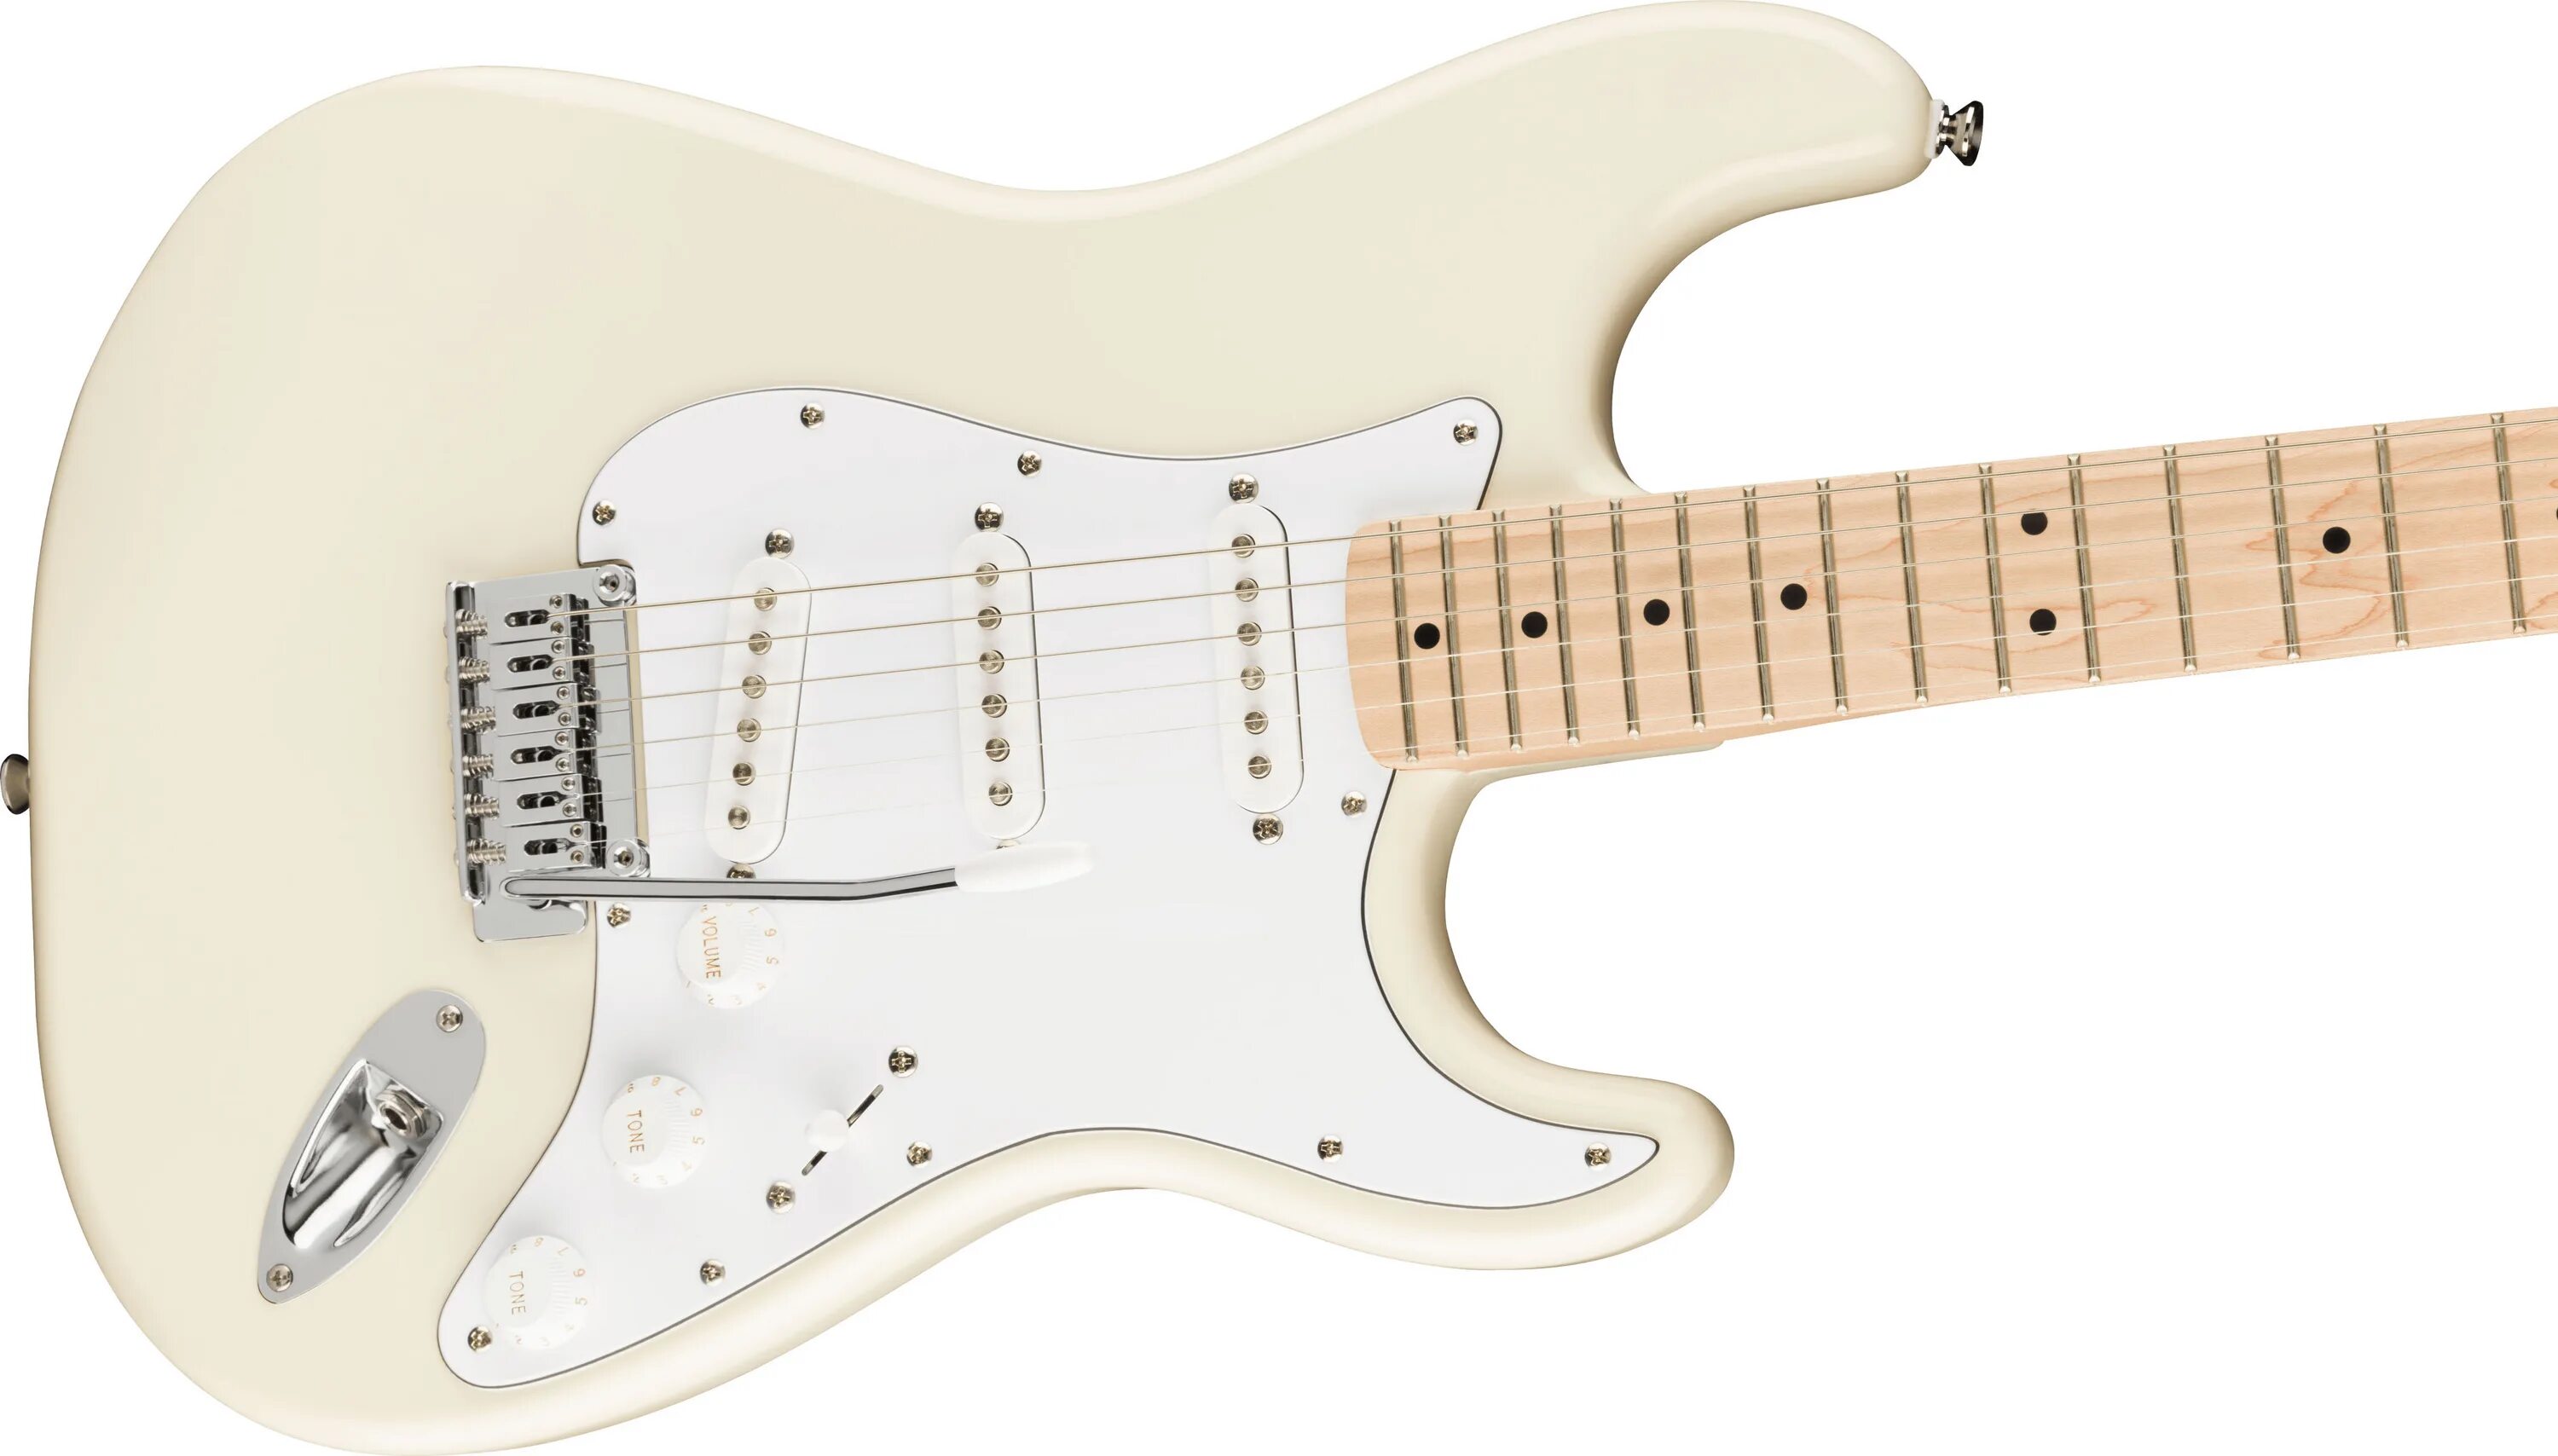 Affinity stratocaster. Fender Stratocaster Affinity Olympic White. Fender Squier Olympic White. Fender American professional Stratocaster. Электрогитара Fender Squier Stratocaster.